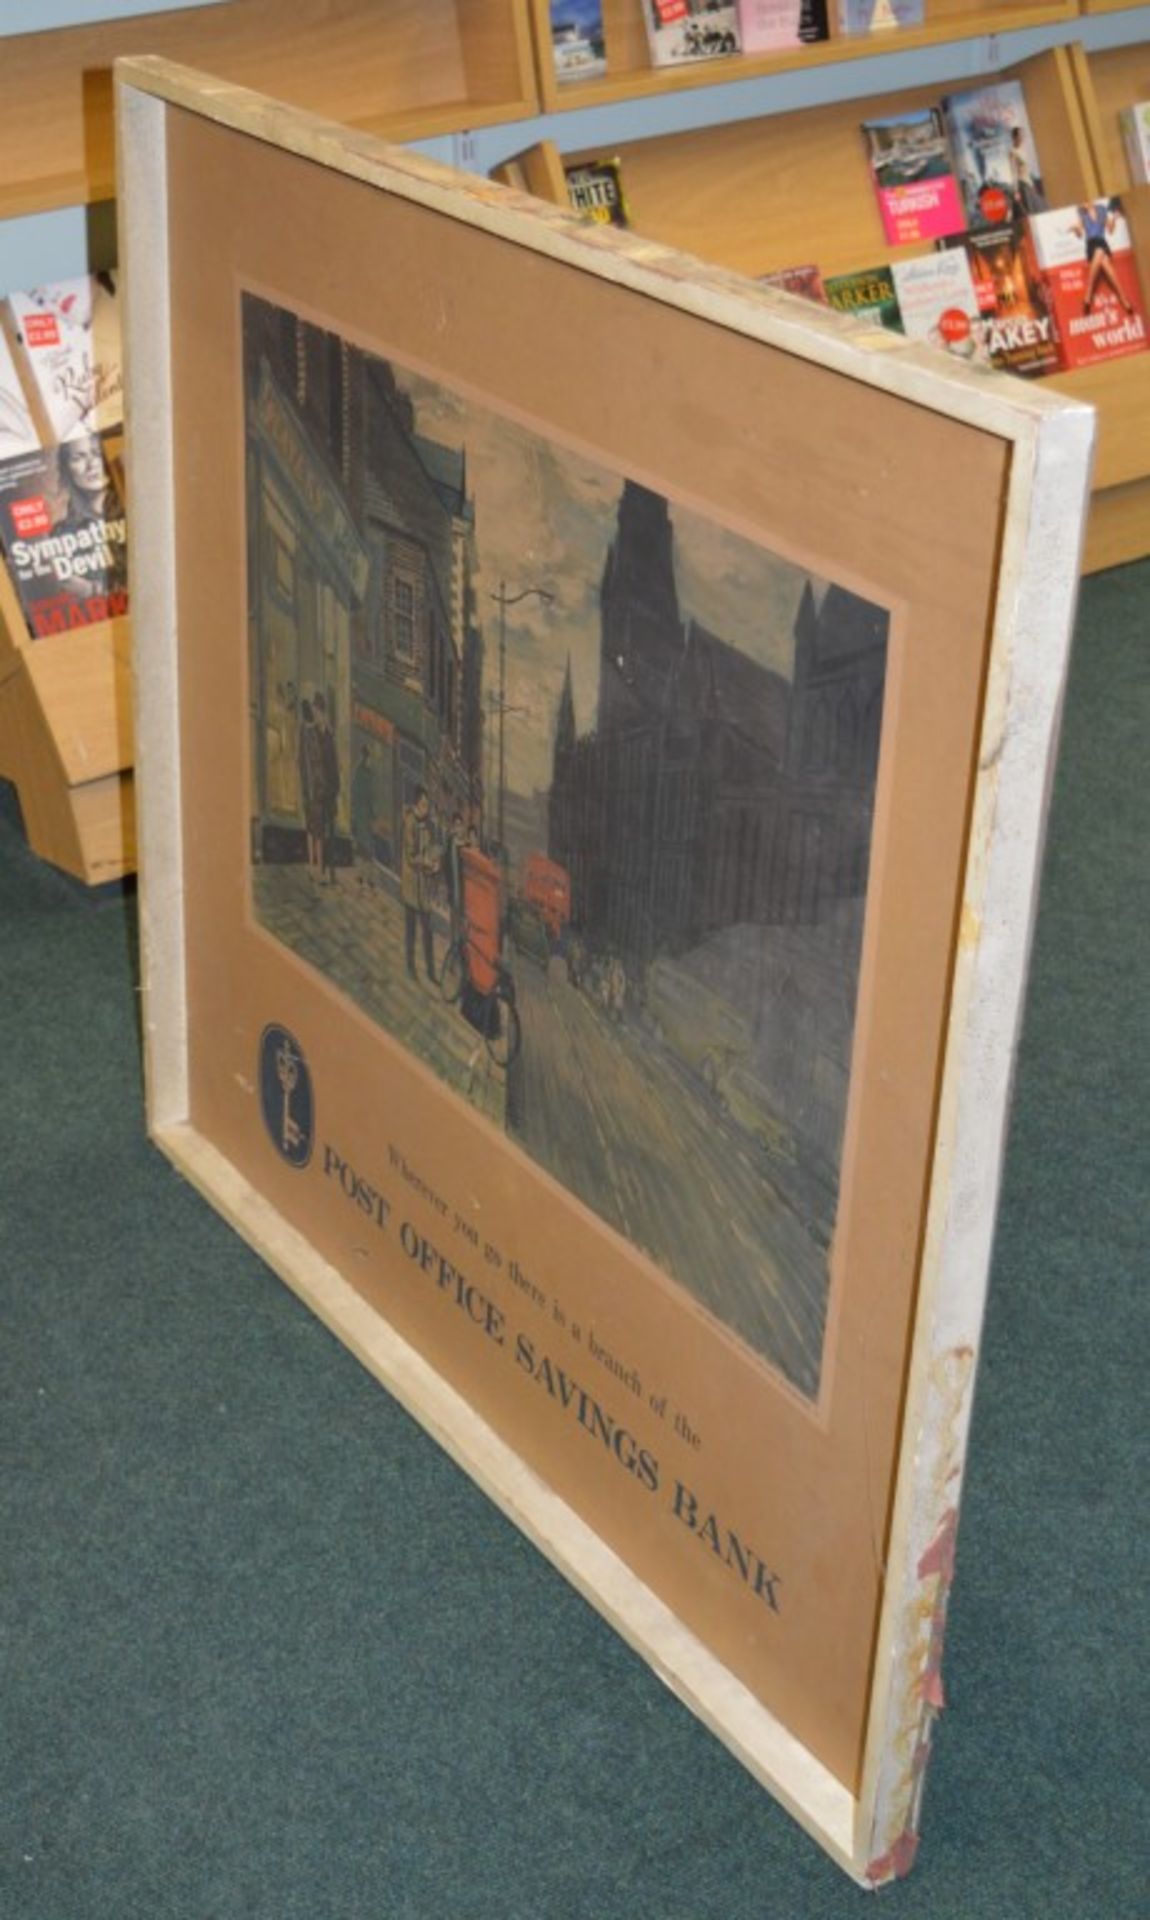 1 x Antique 'Post Office Savings Bank' Framed Advertisement Picture Depicting Owens College of - Image 11 of 13